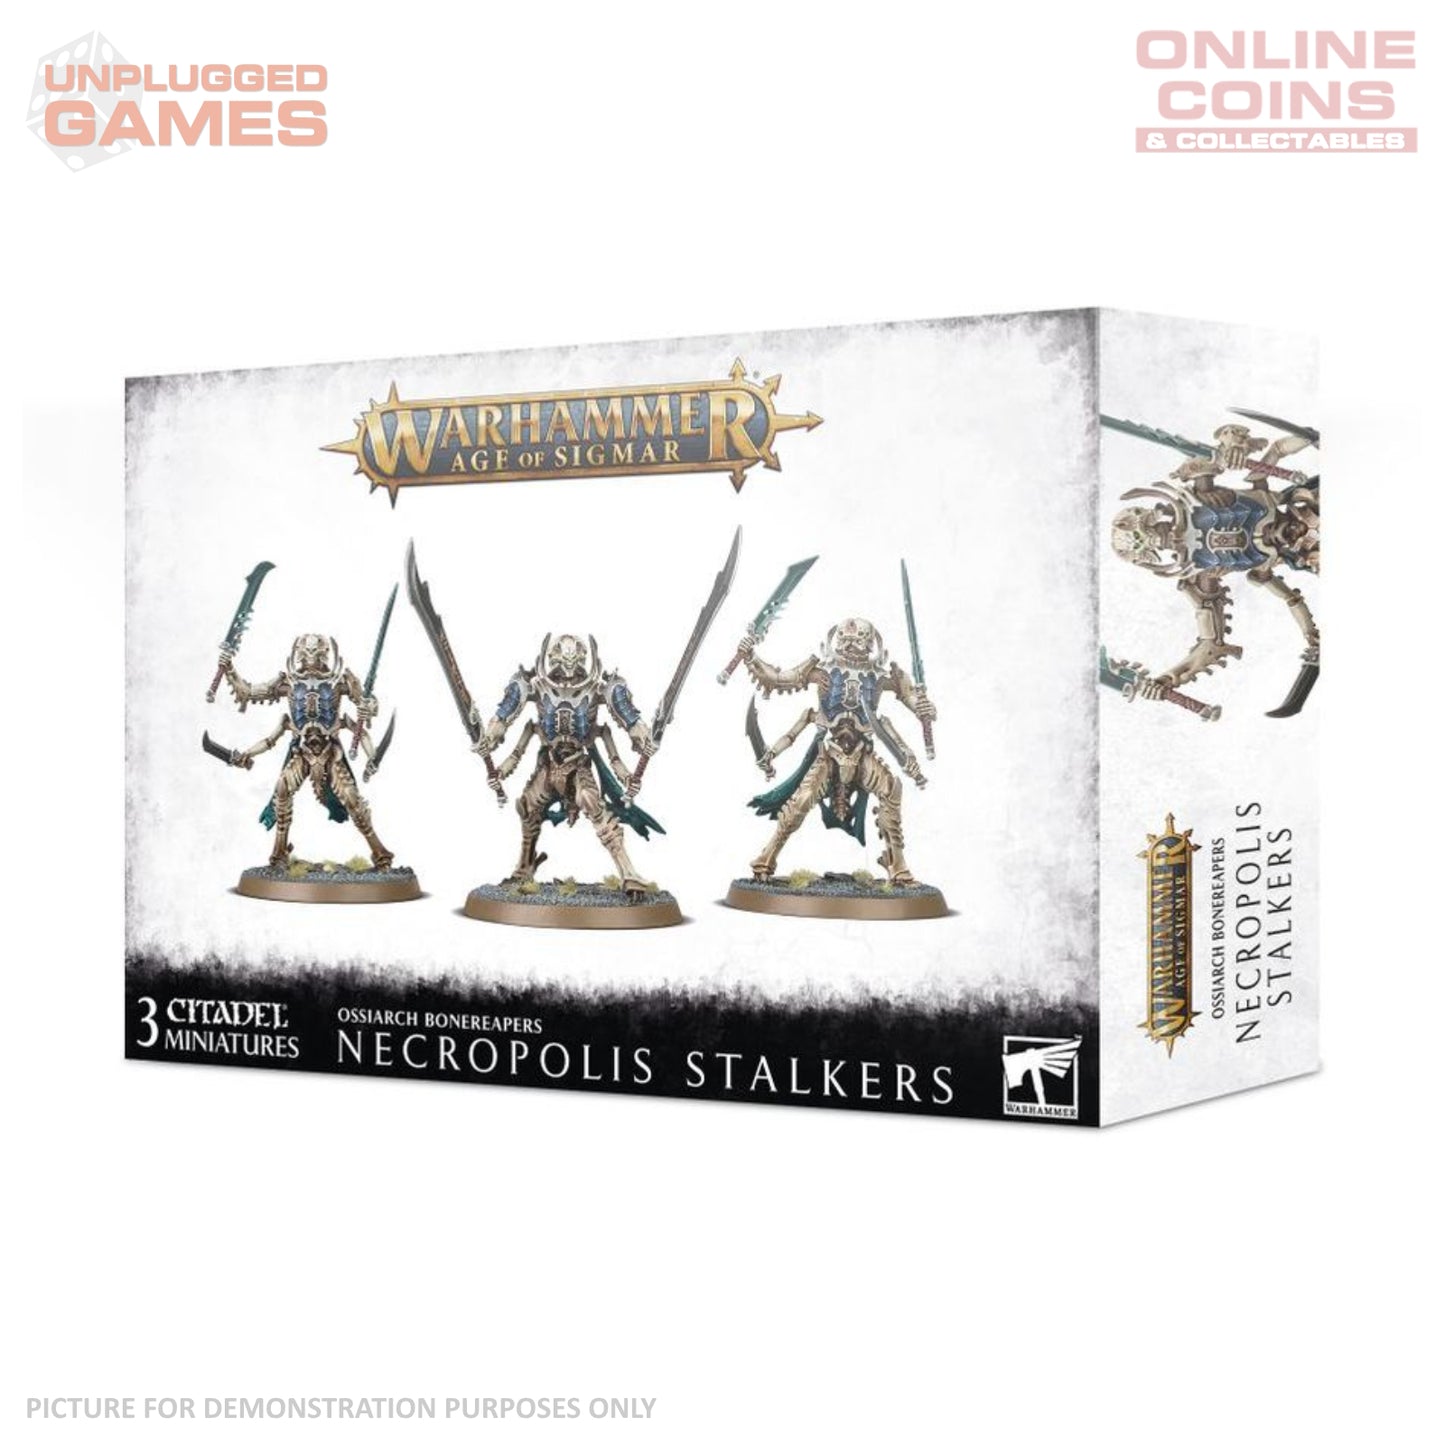 Warhammer Age of Sigmar - Ossiarch Bonereapers Necropolis Stalkers